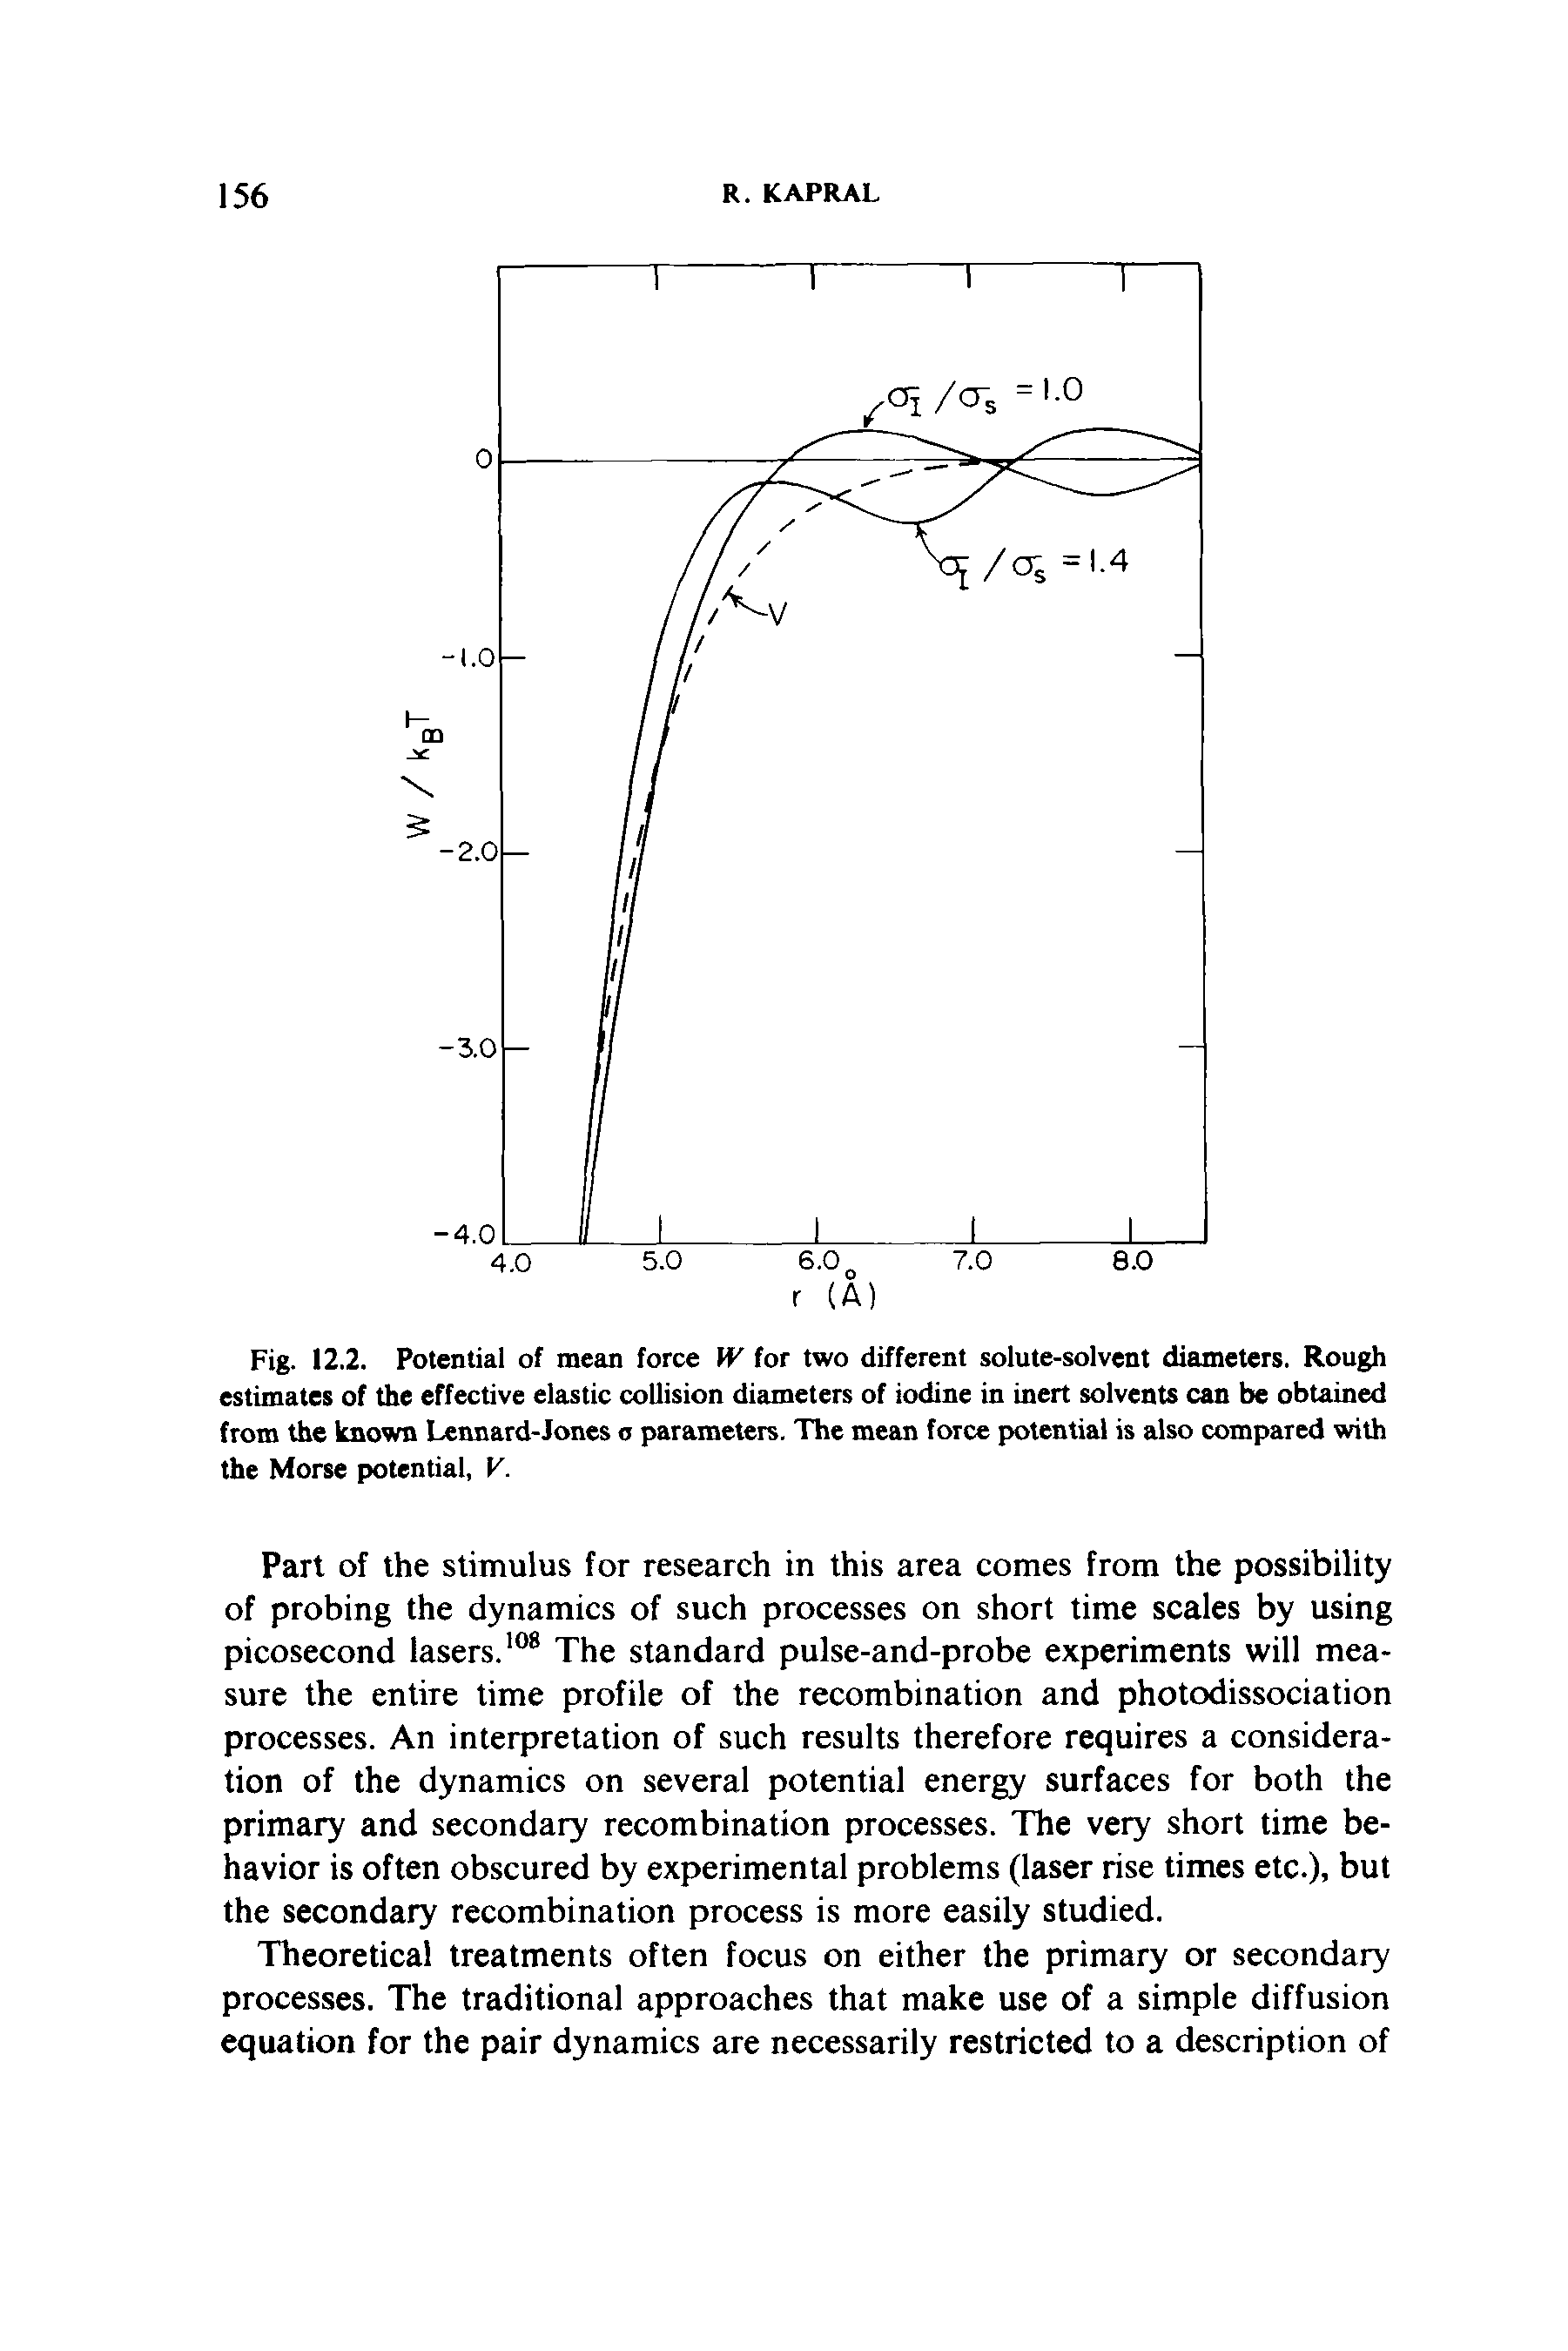 Fig. 12.2. Potential of mean force fV for two different solute-solvent diameters. Rough estimates of the effective elastic collision diameters of iodine in inert solvents can be obtained from the known Lennard-Jones o parameters. The mean force potential is also compared with the Morse potential, K...